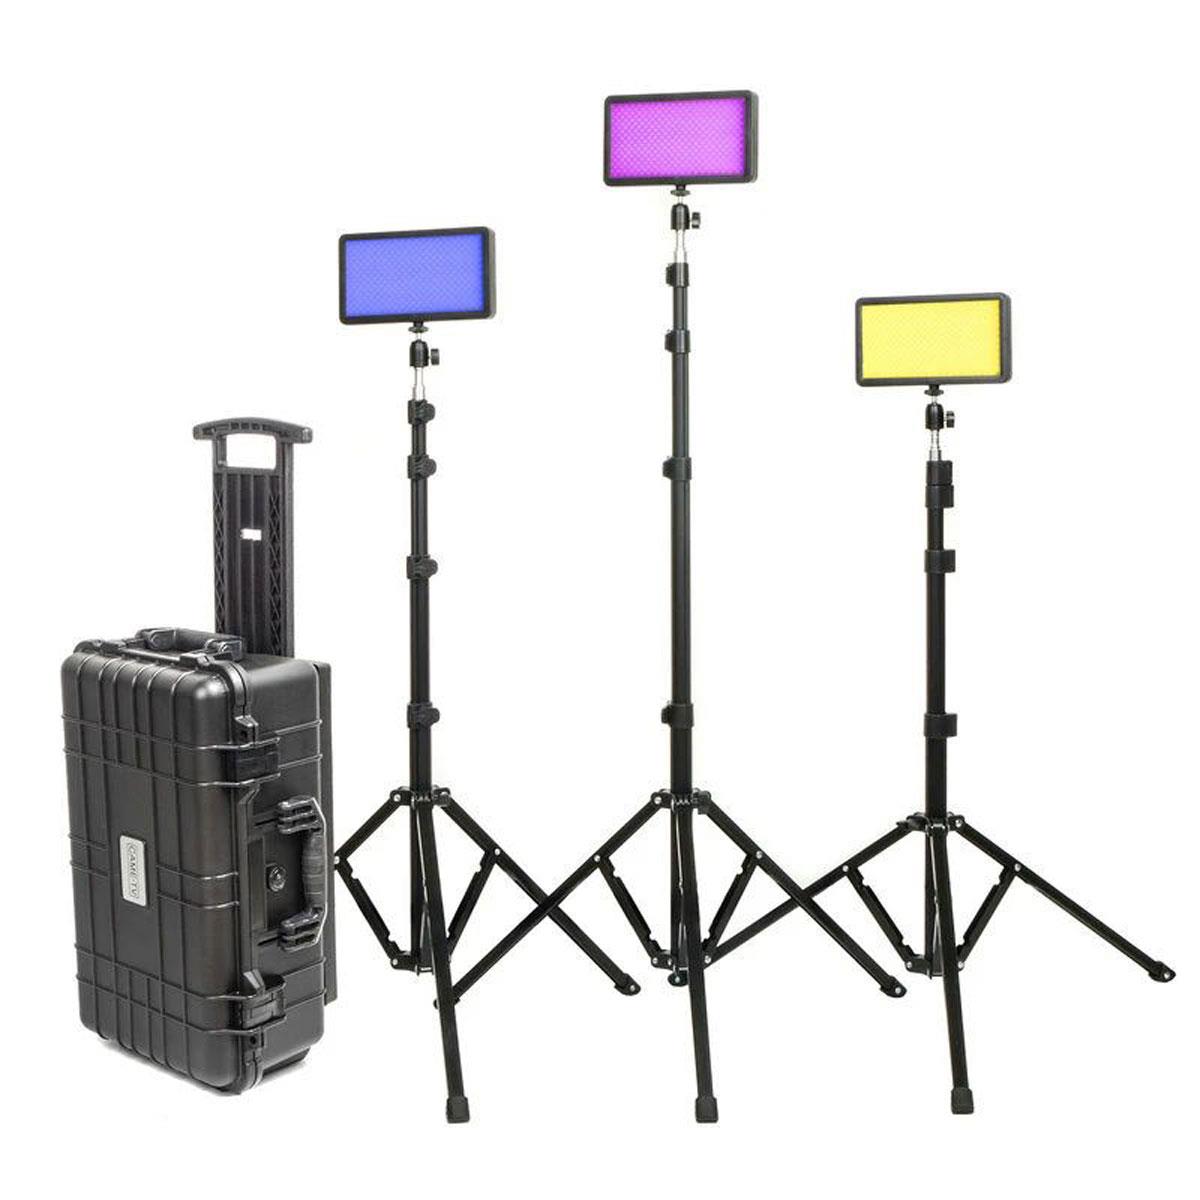 Image of Came-TV Boltzen Perseus P-20R 20W RGBDT 3-Light Kit with Stands &amp; Batteries